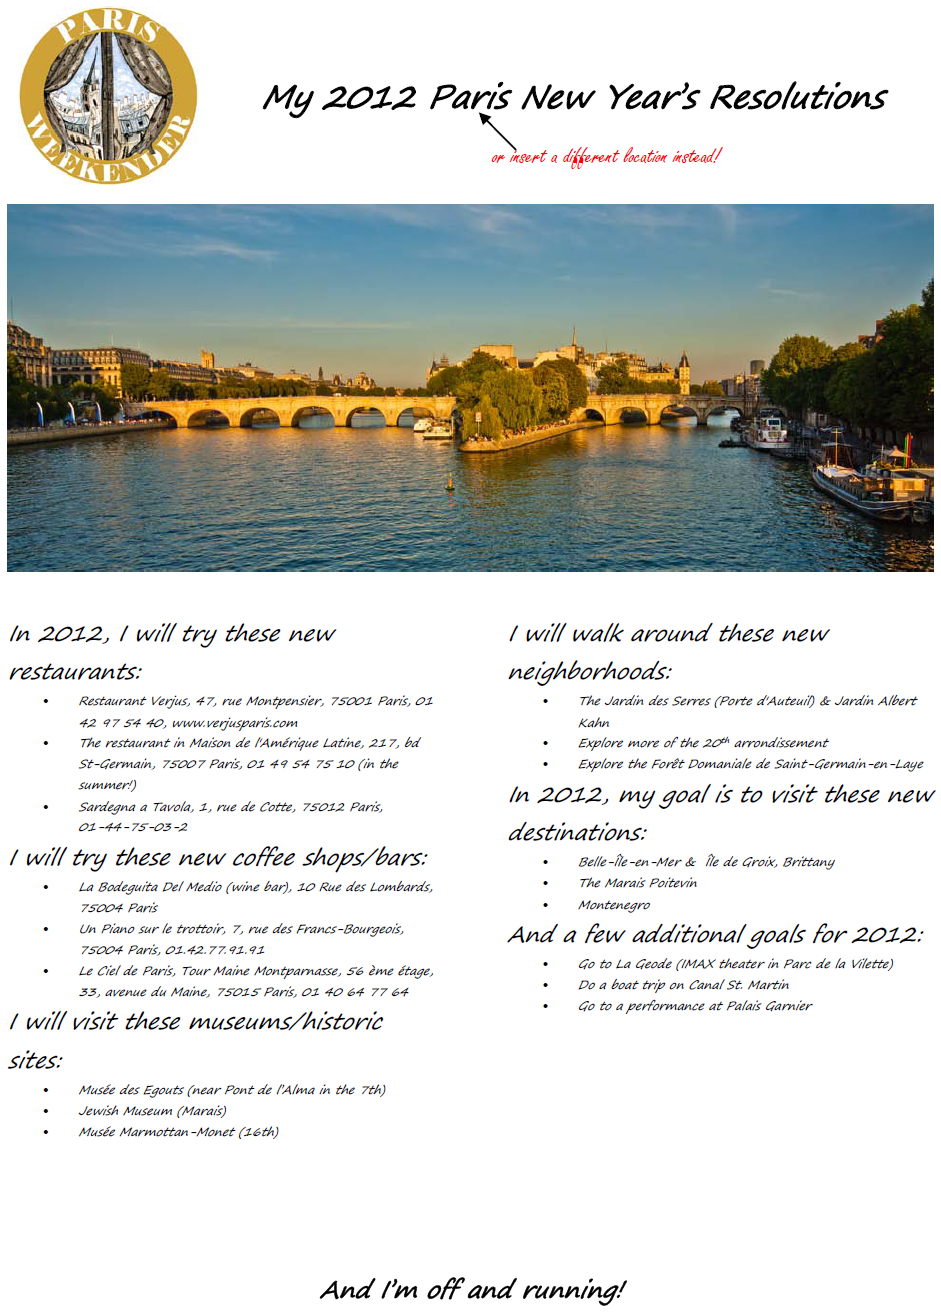 Your 2012 “Paris” New Year’s Resolutions